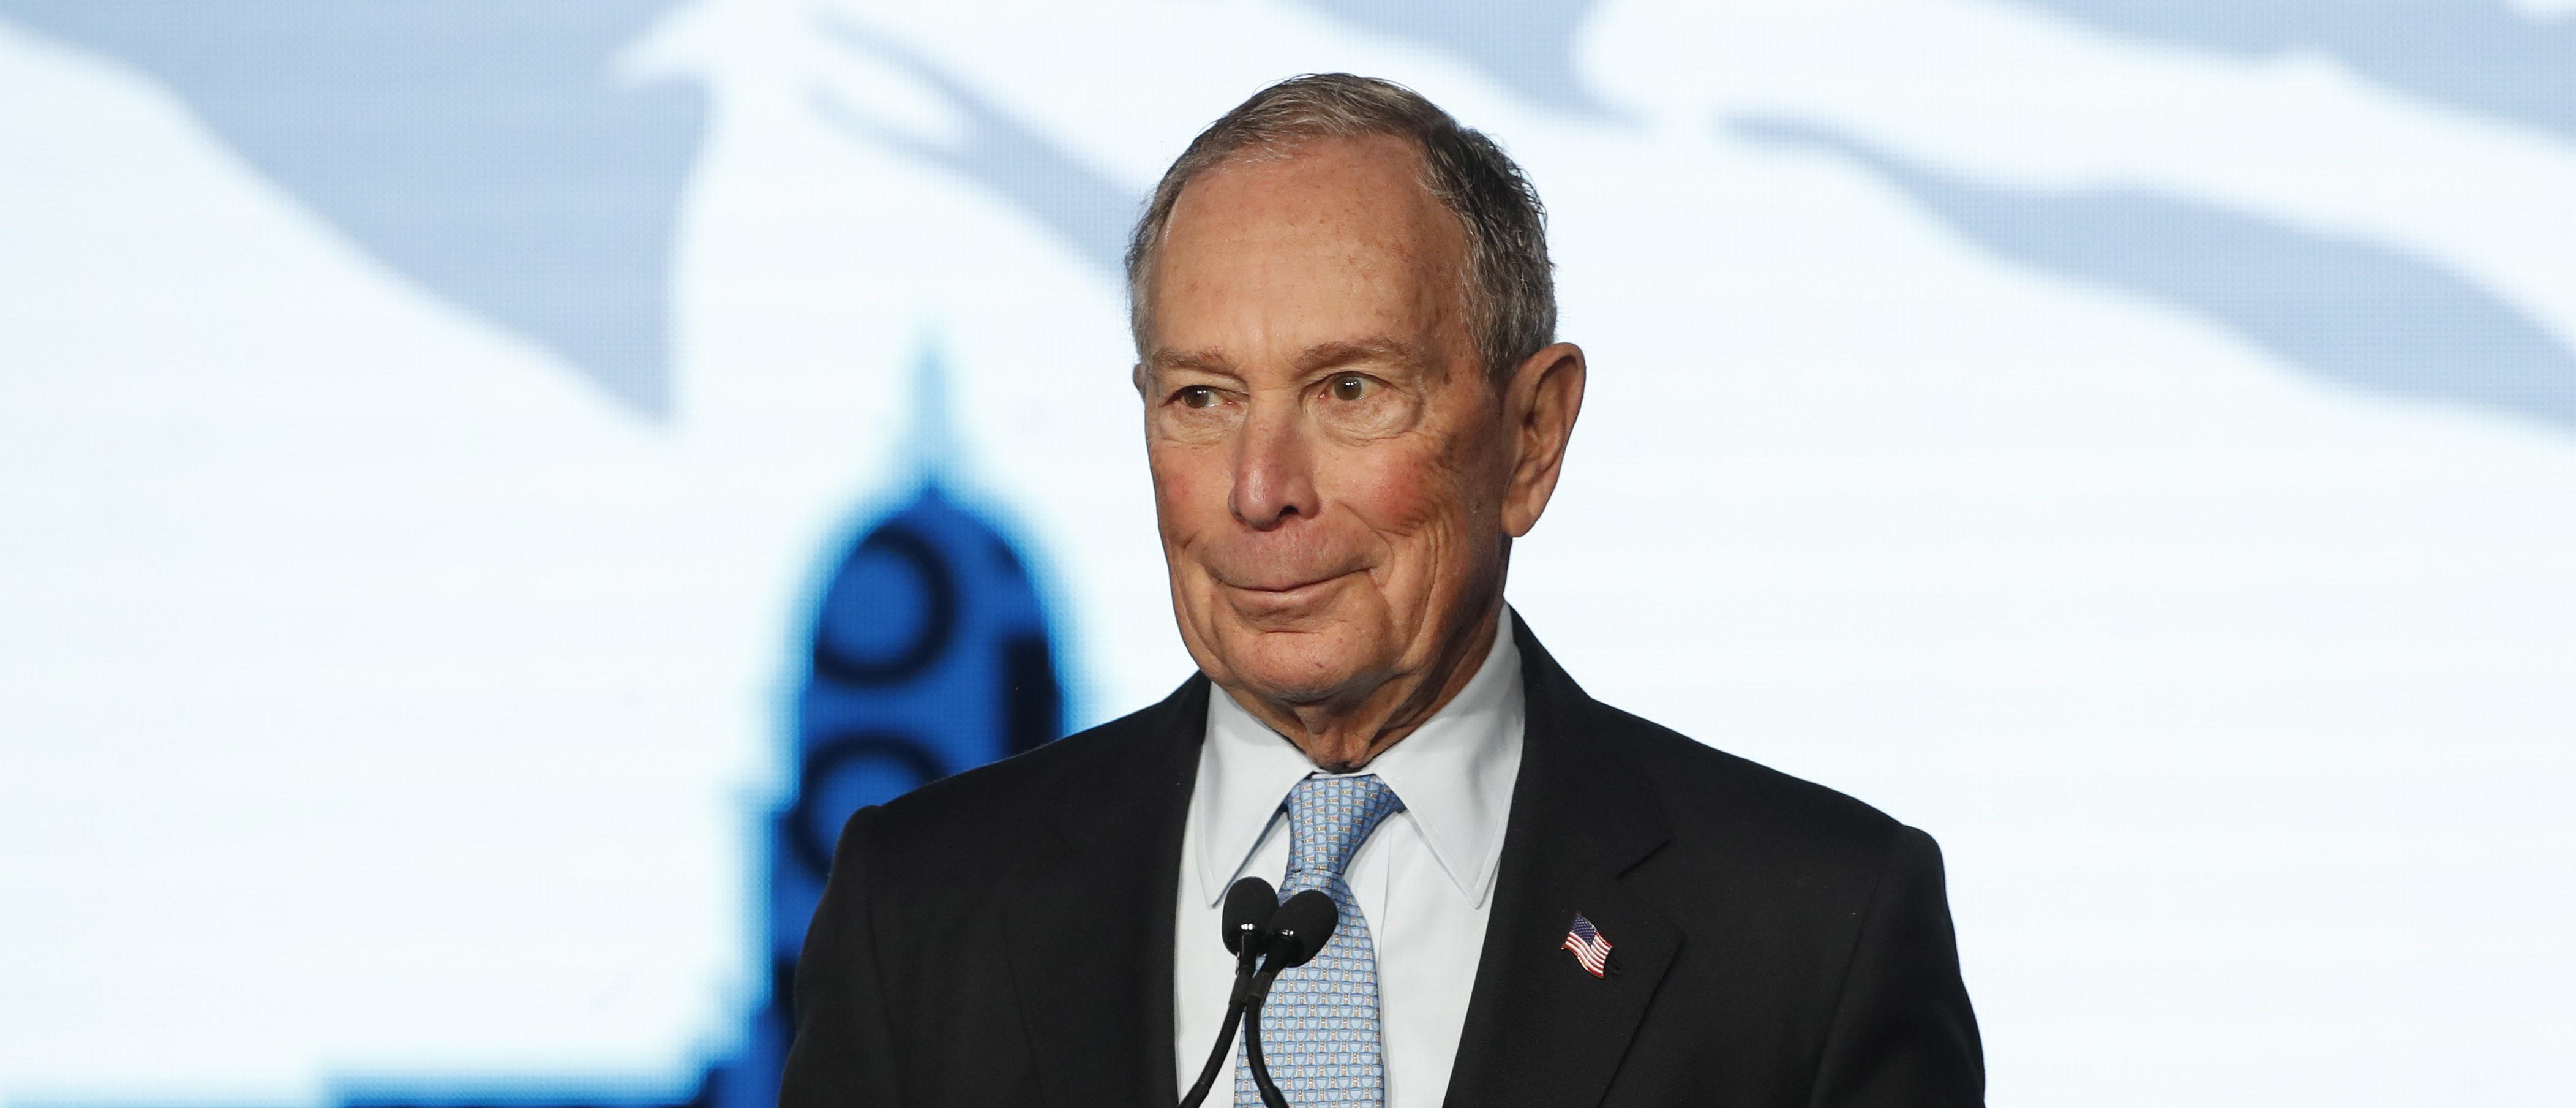 SALT LAKE CITY, UT - FEBRUARY 20: Democratic presidential candidate, former New York City mayor Mike Bloomberg talks to supporters at a rally on February 20, 2020 in Salt Lake City, Utah. Bloomberg is making his second visit to Utah before it votes on super Tuesday March 3rd.(Photo by George Frey/Getty Images)